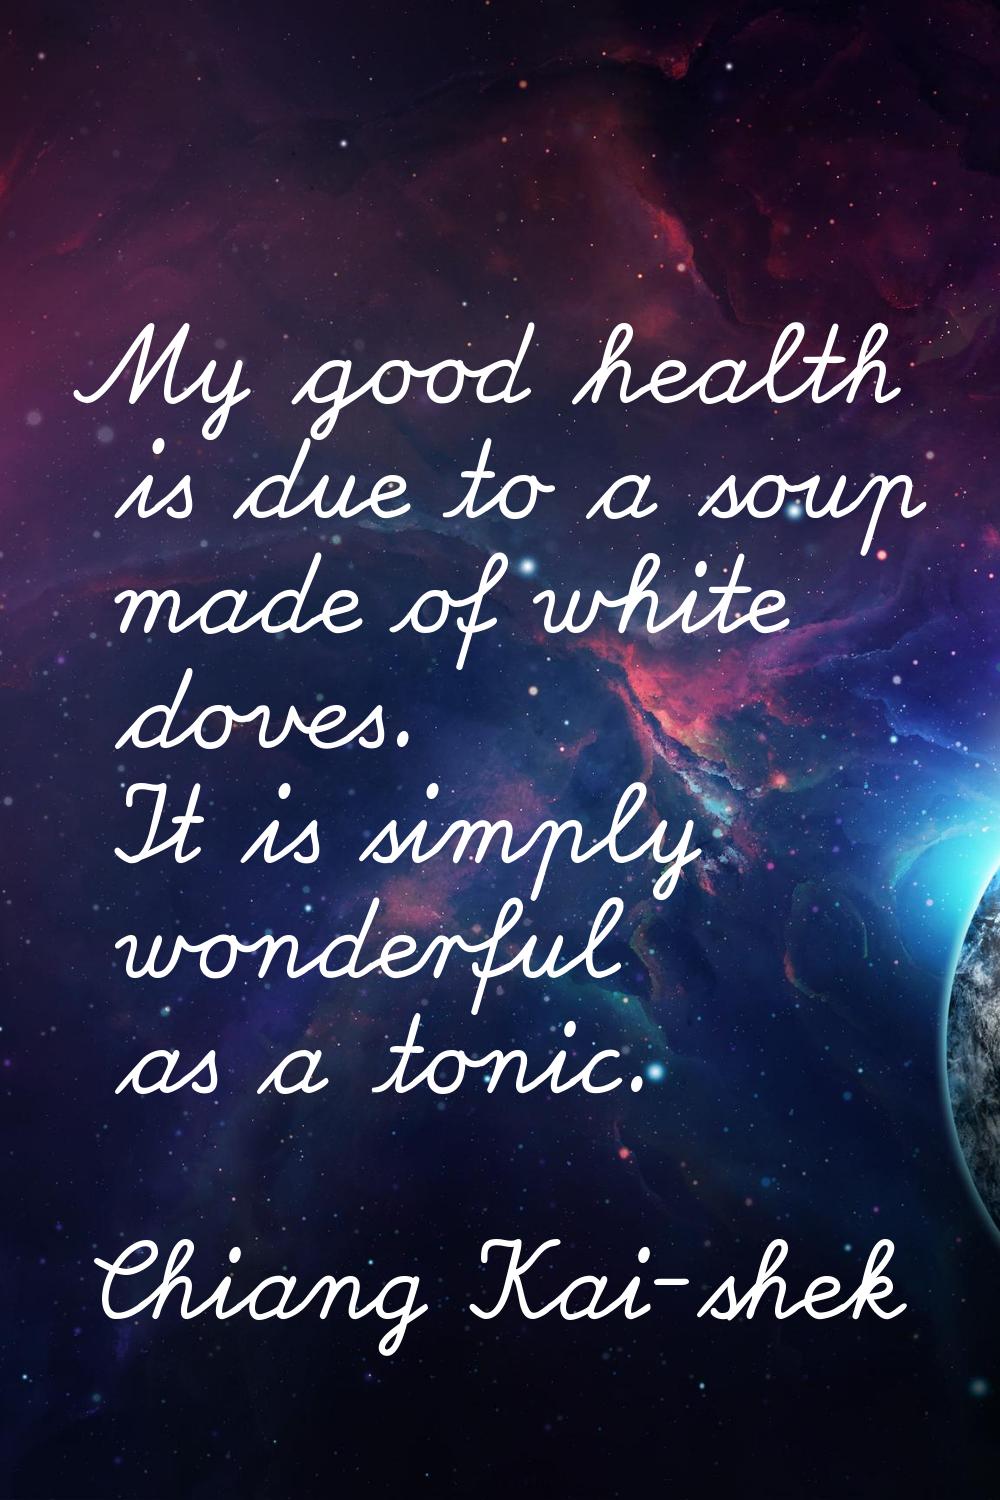 My good health is due to a soup made of white doves. It is simply wonderful as a tonic.